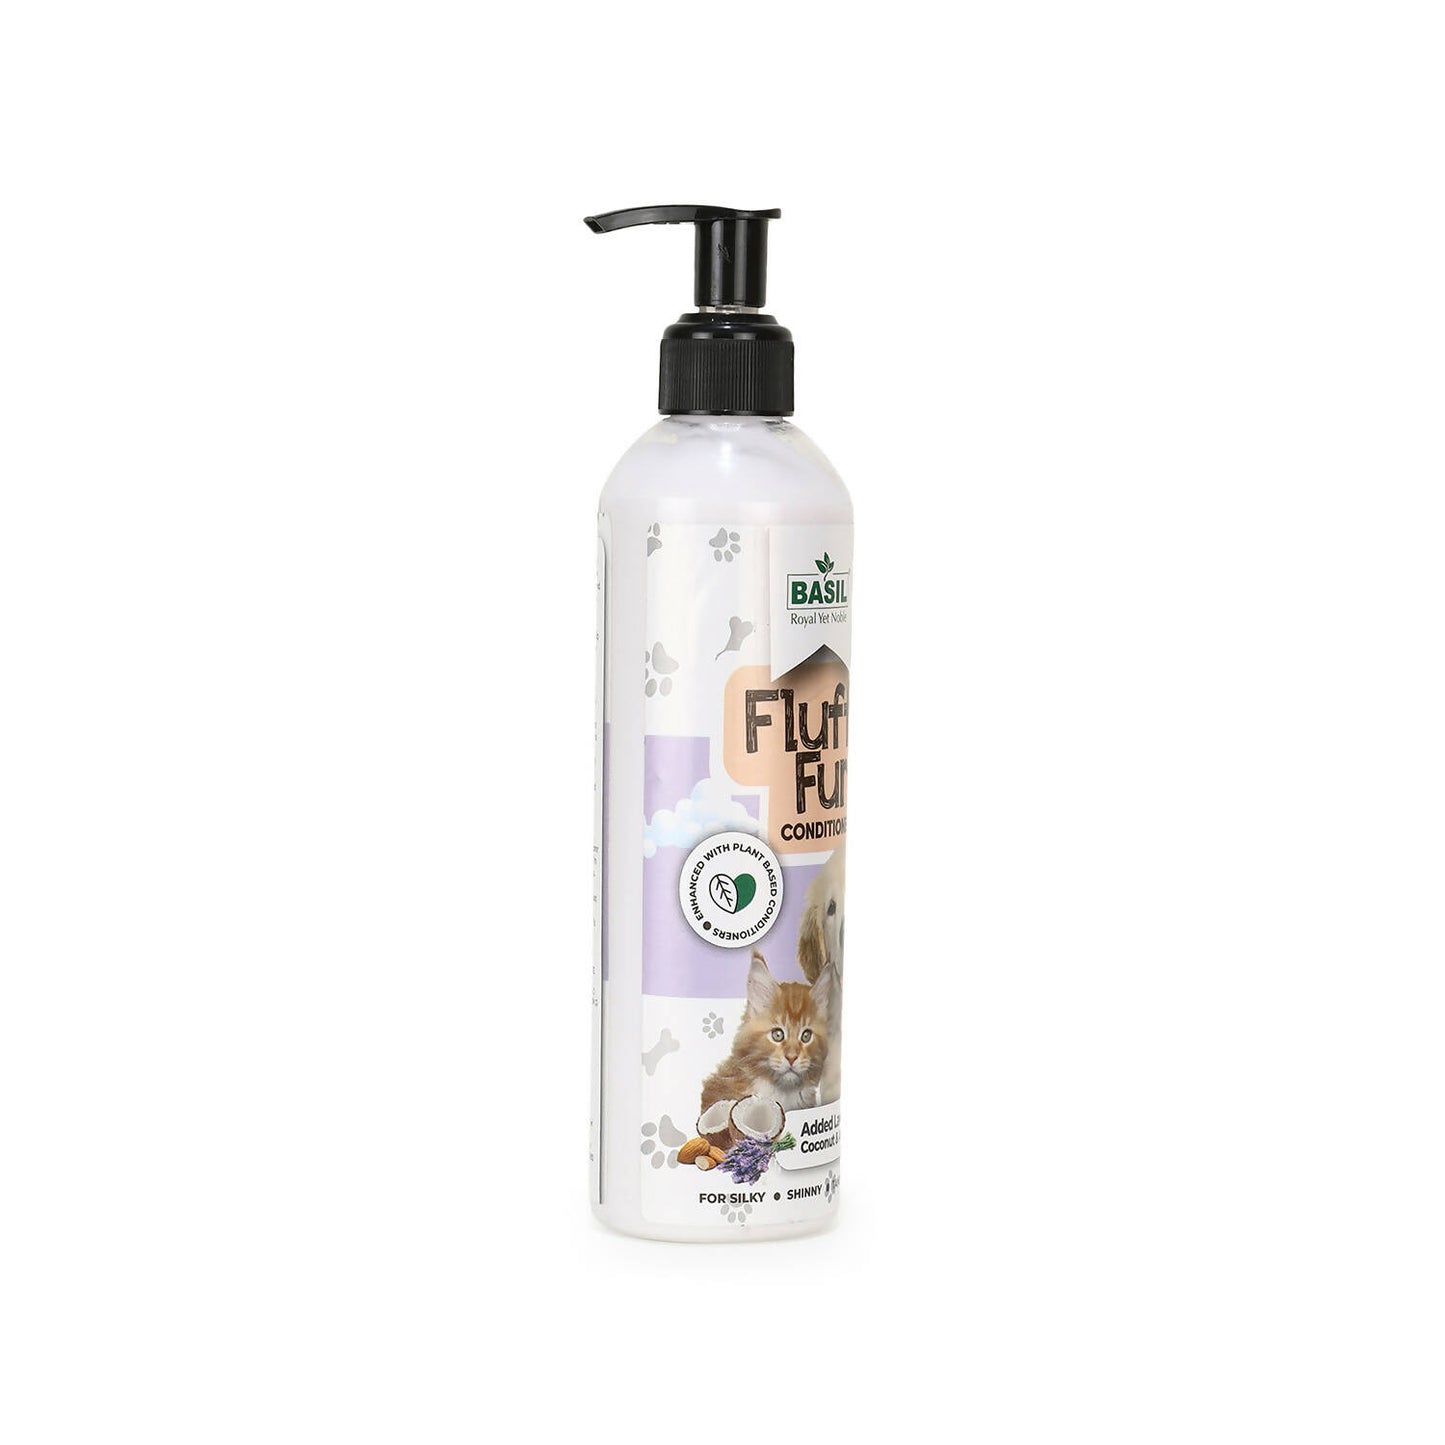 Basil - Fluffy Fur Conditioner For Dog and Cat